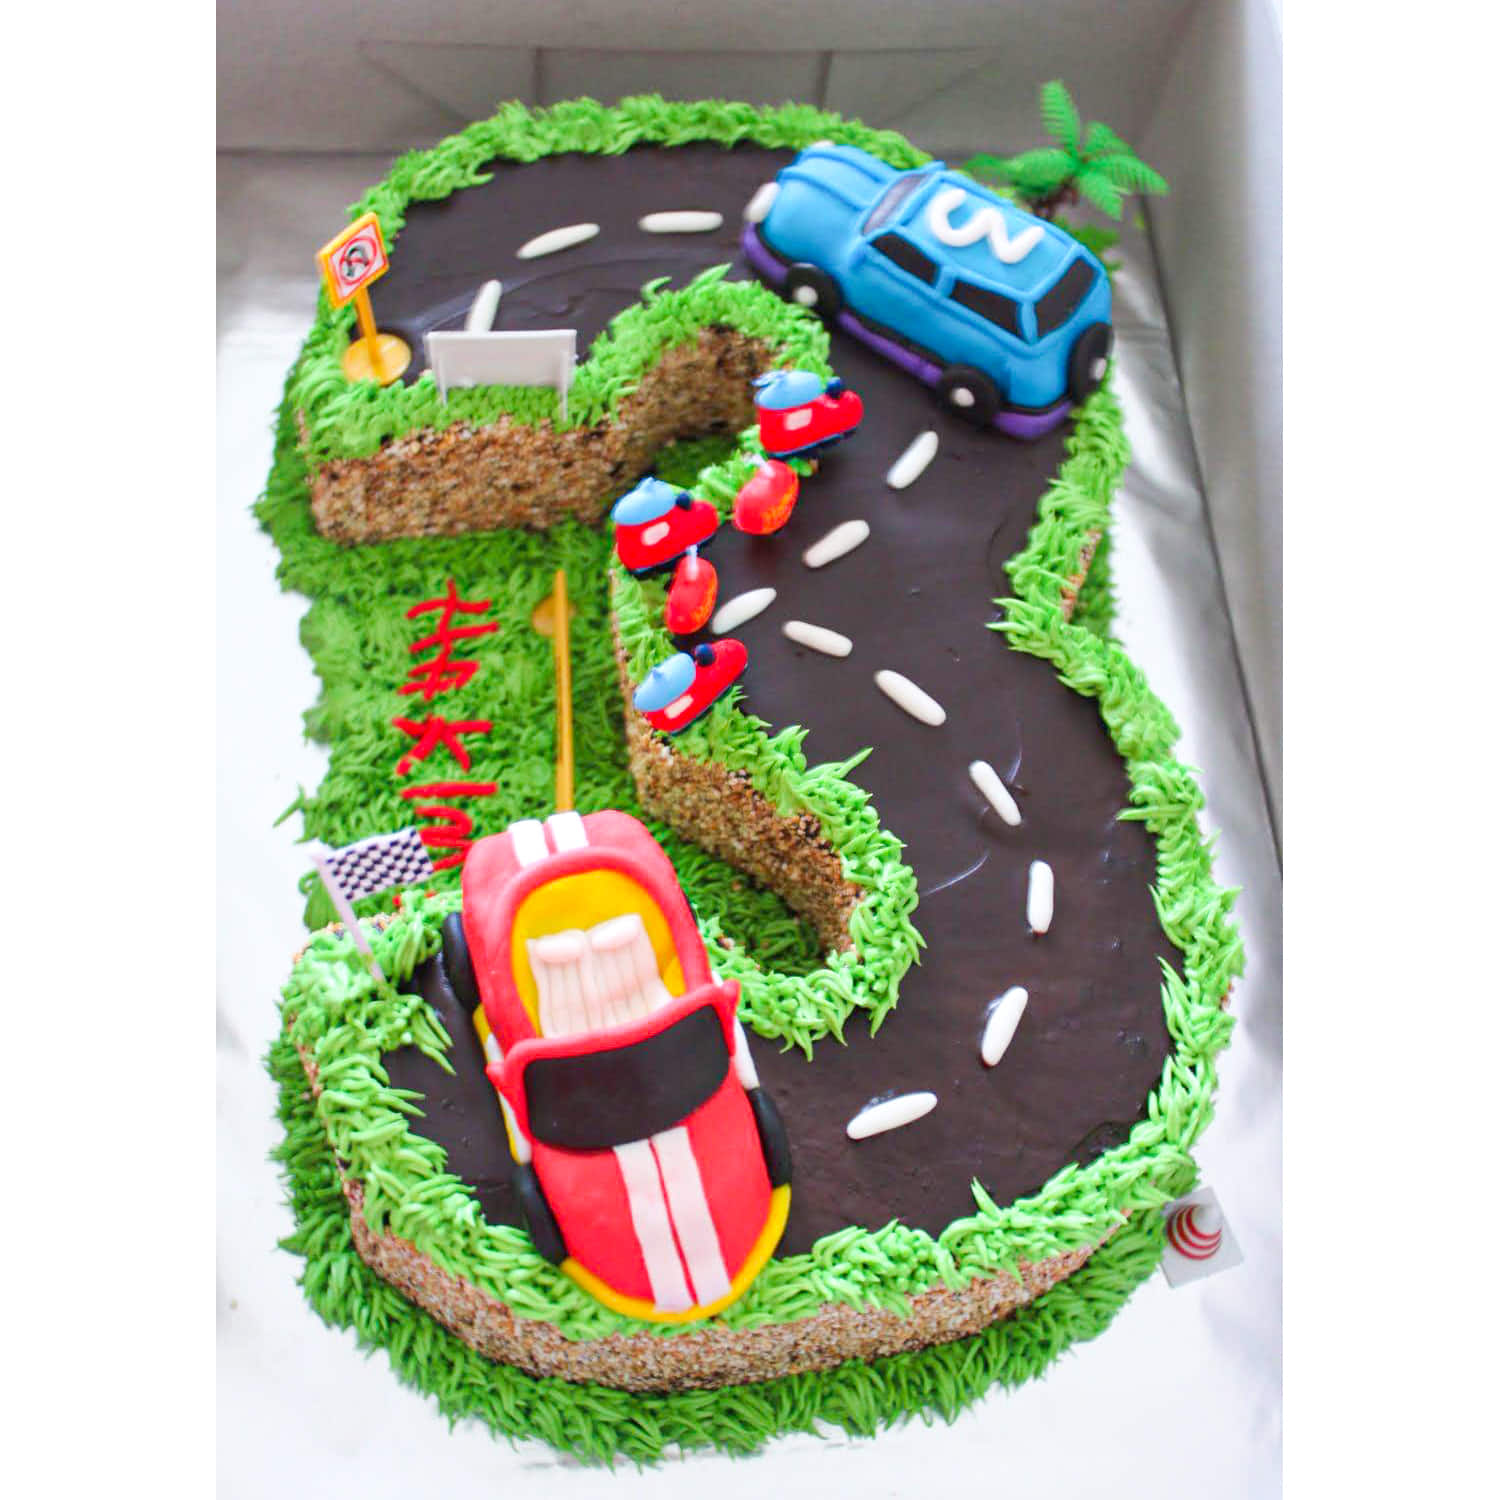 Three Year Spidy Theme Cake Delivery In Delhi NCR